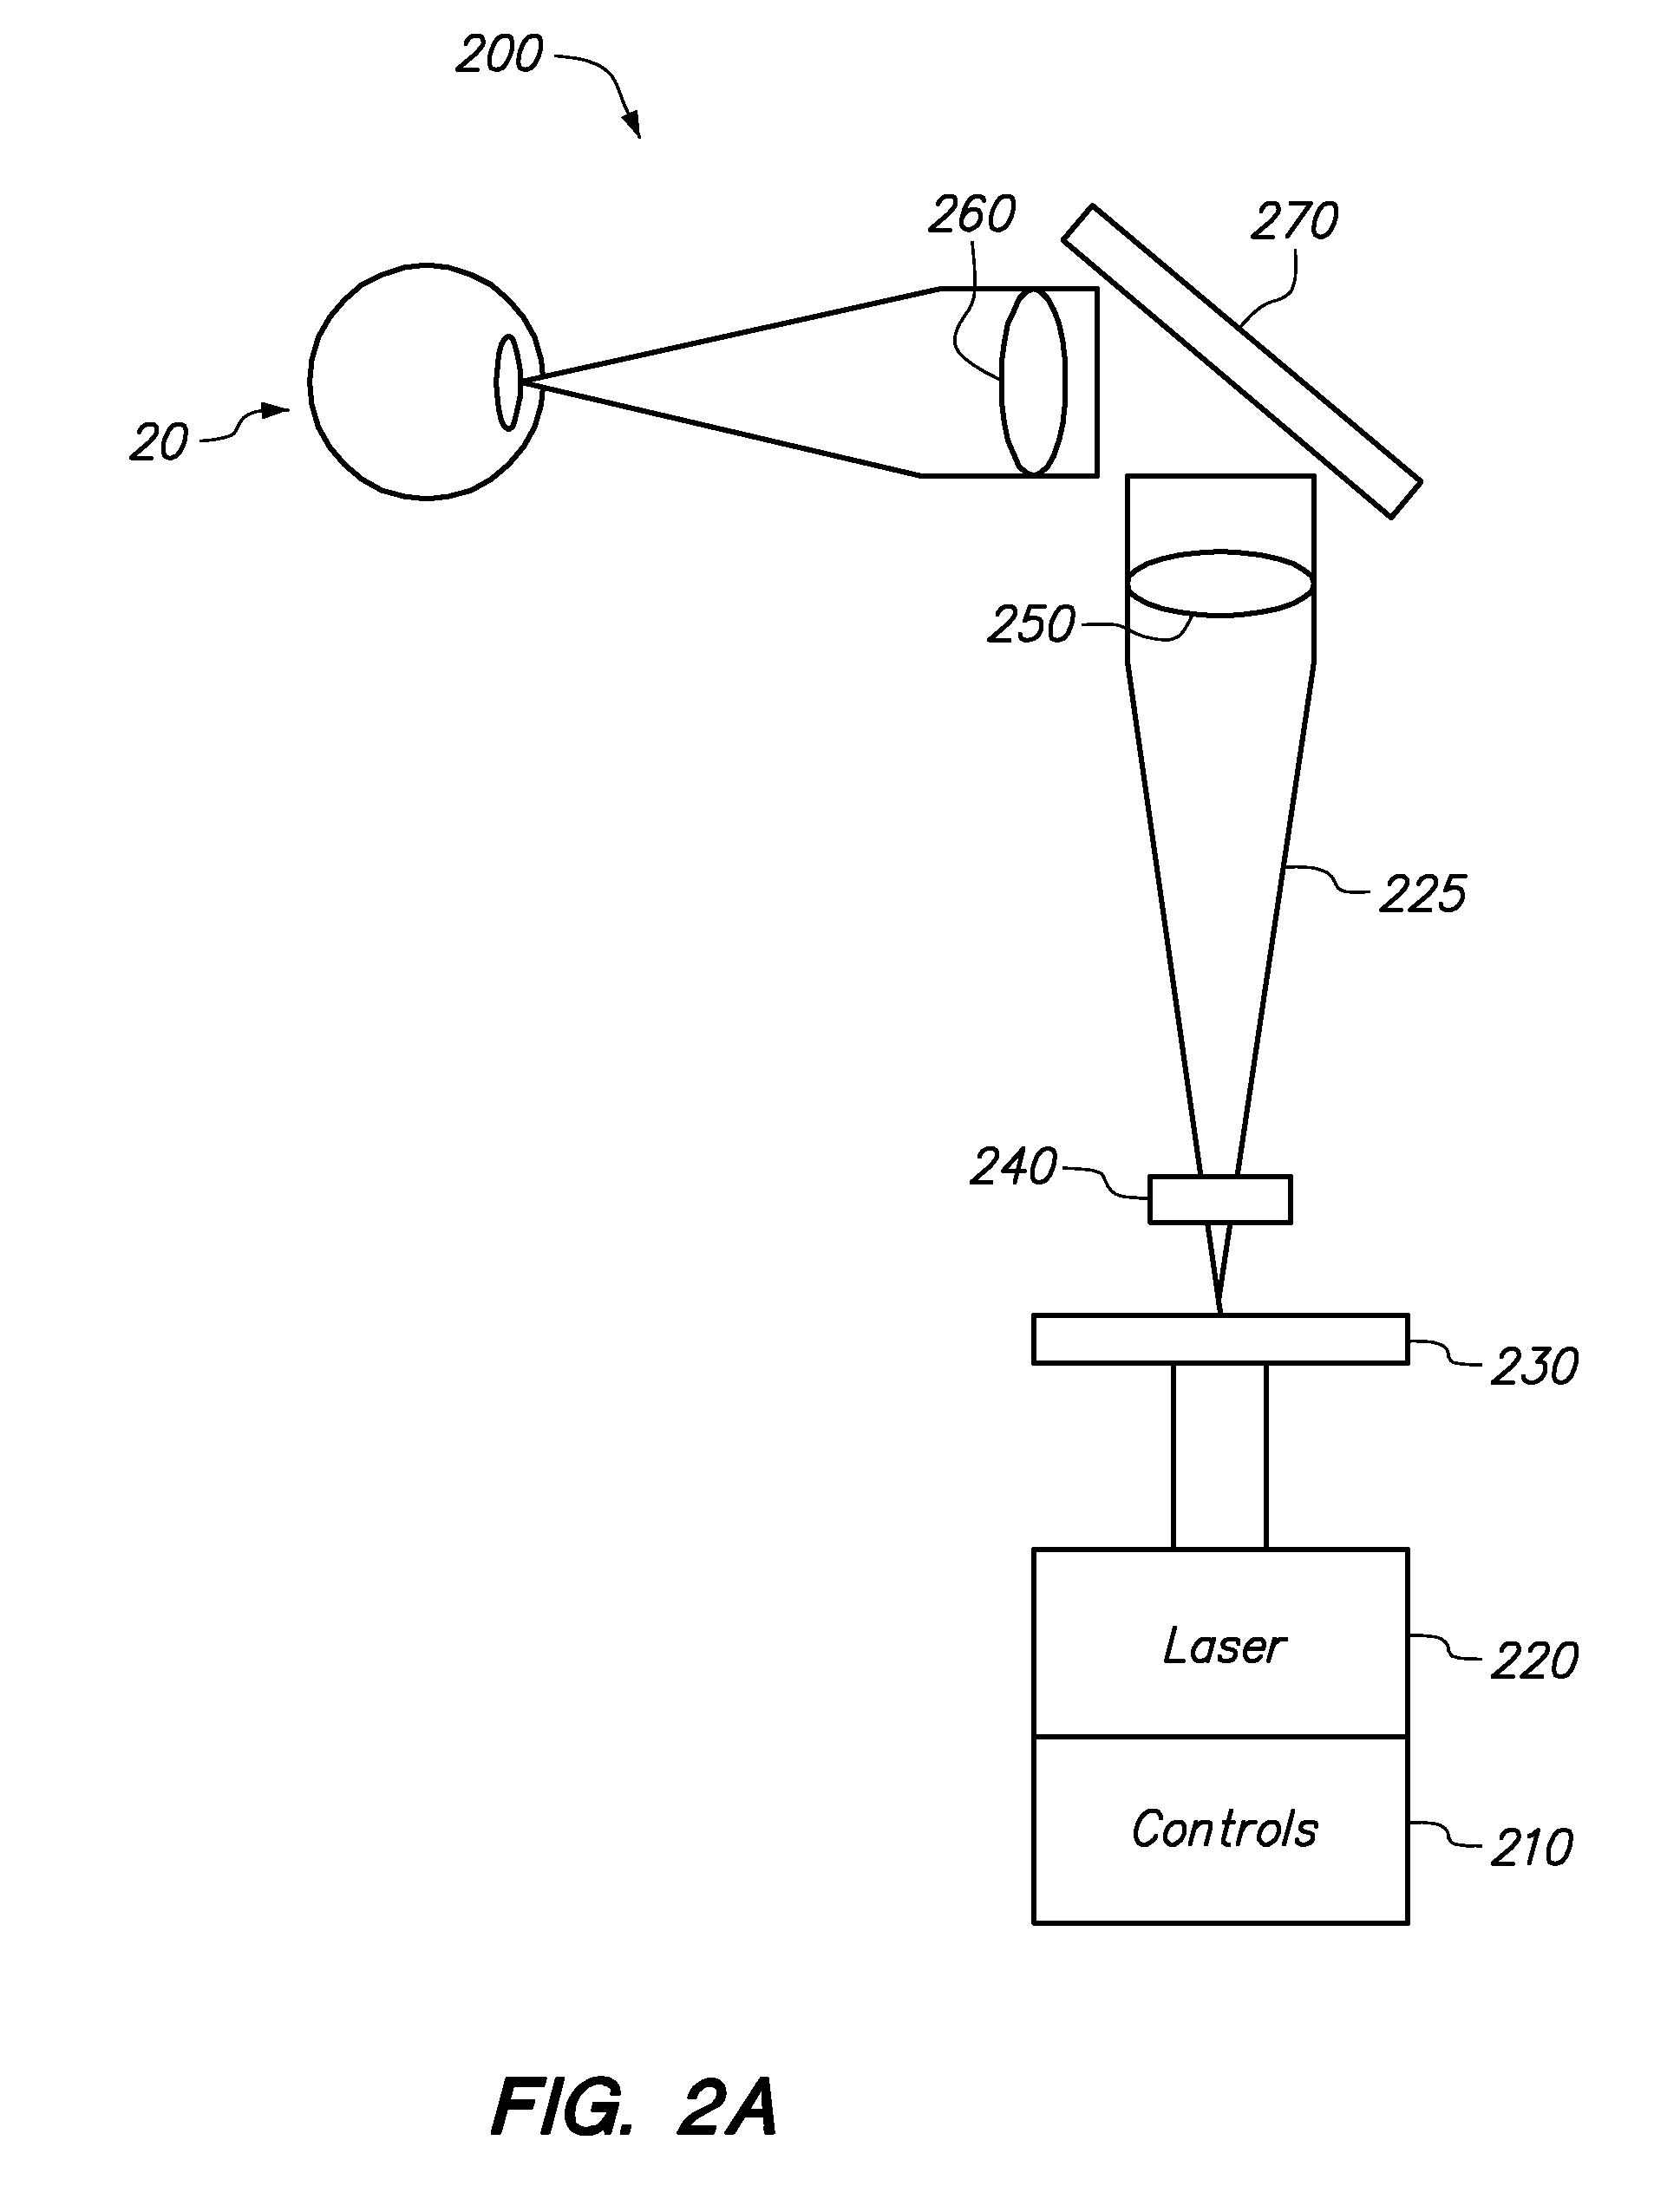 Method and system for modifying eye tissue and intraocular lenses